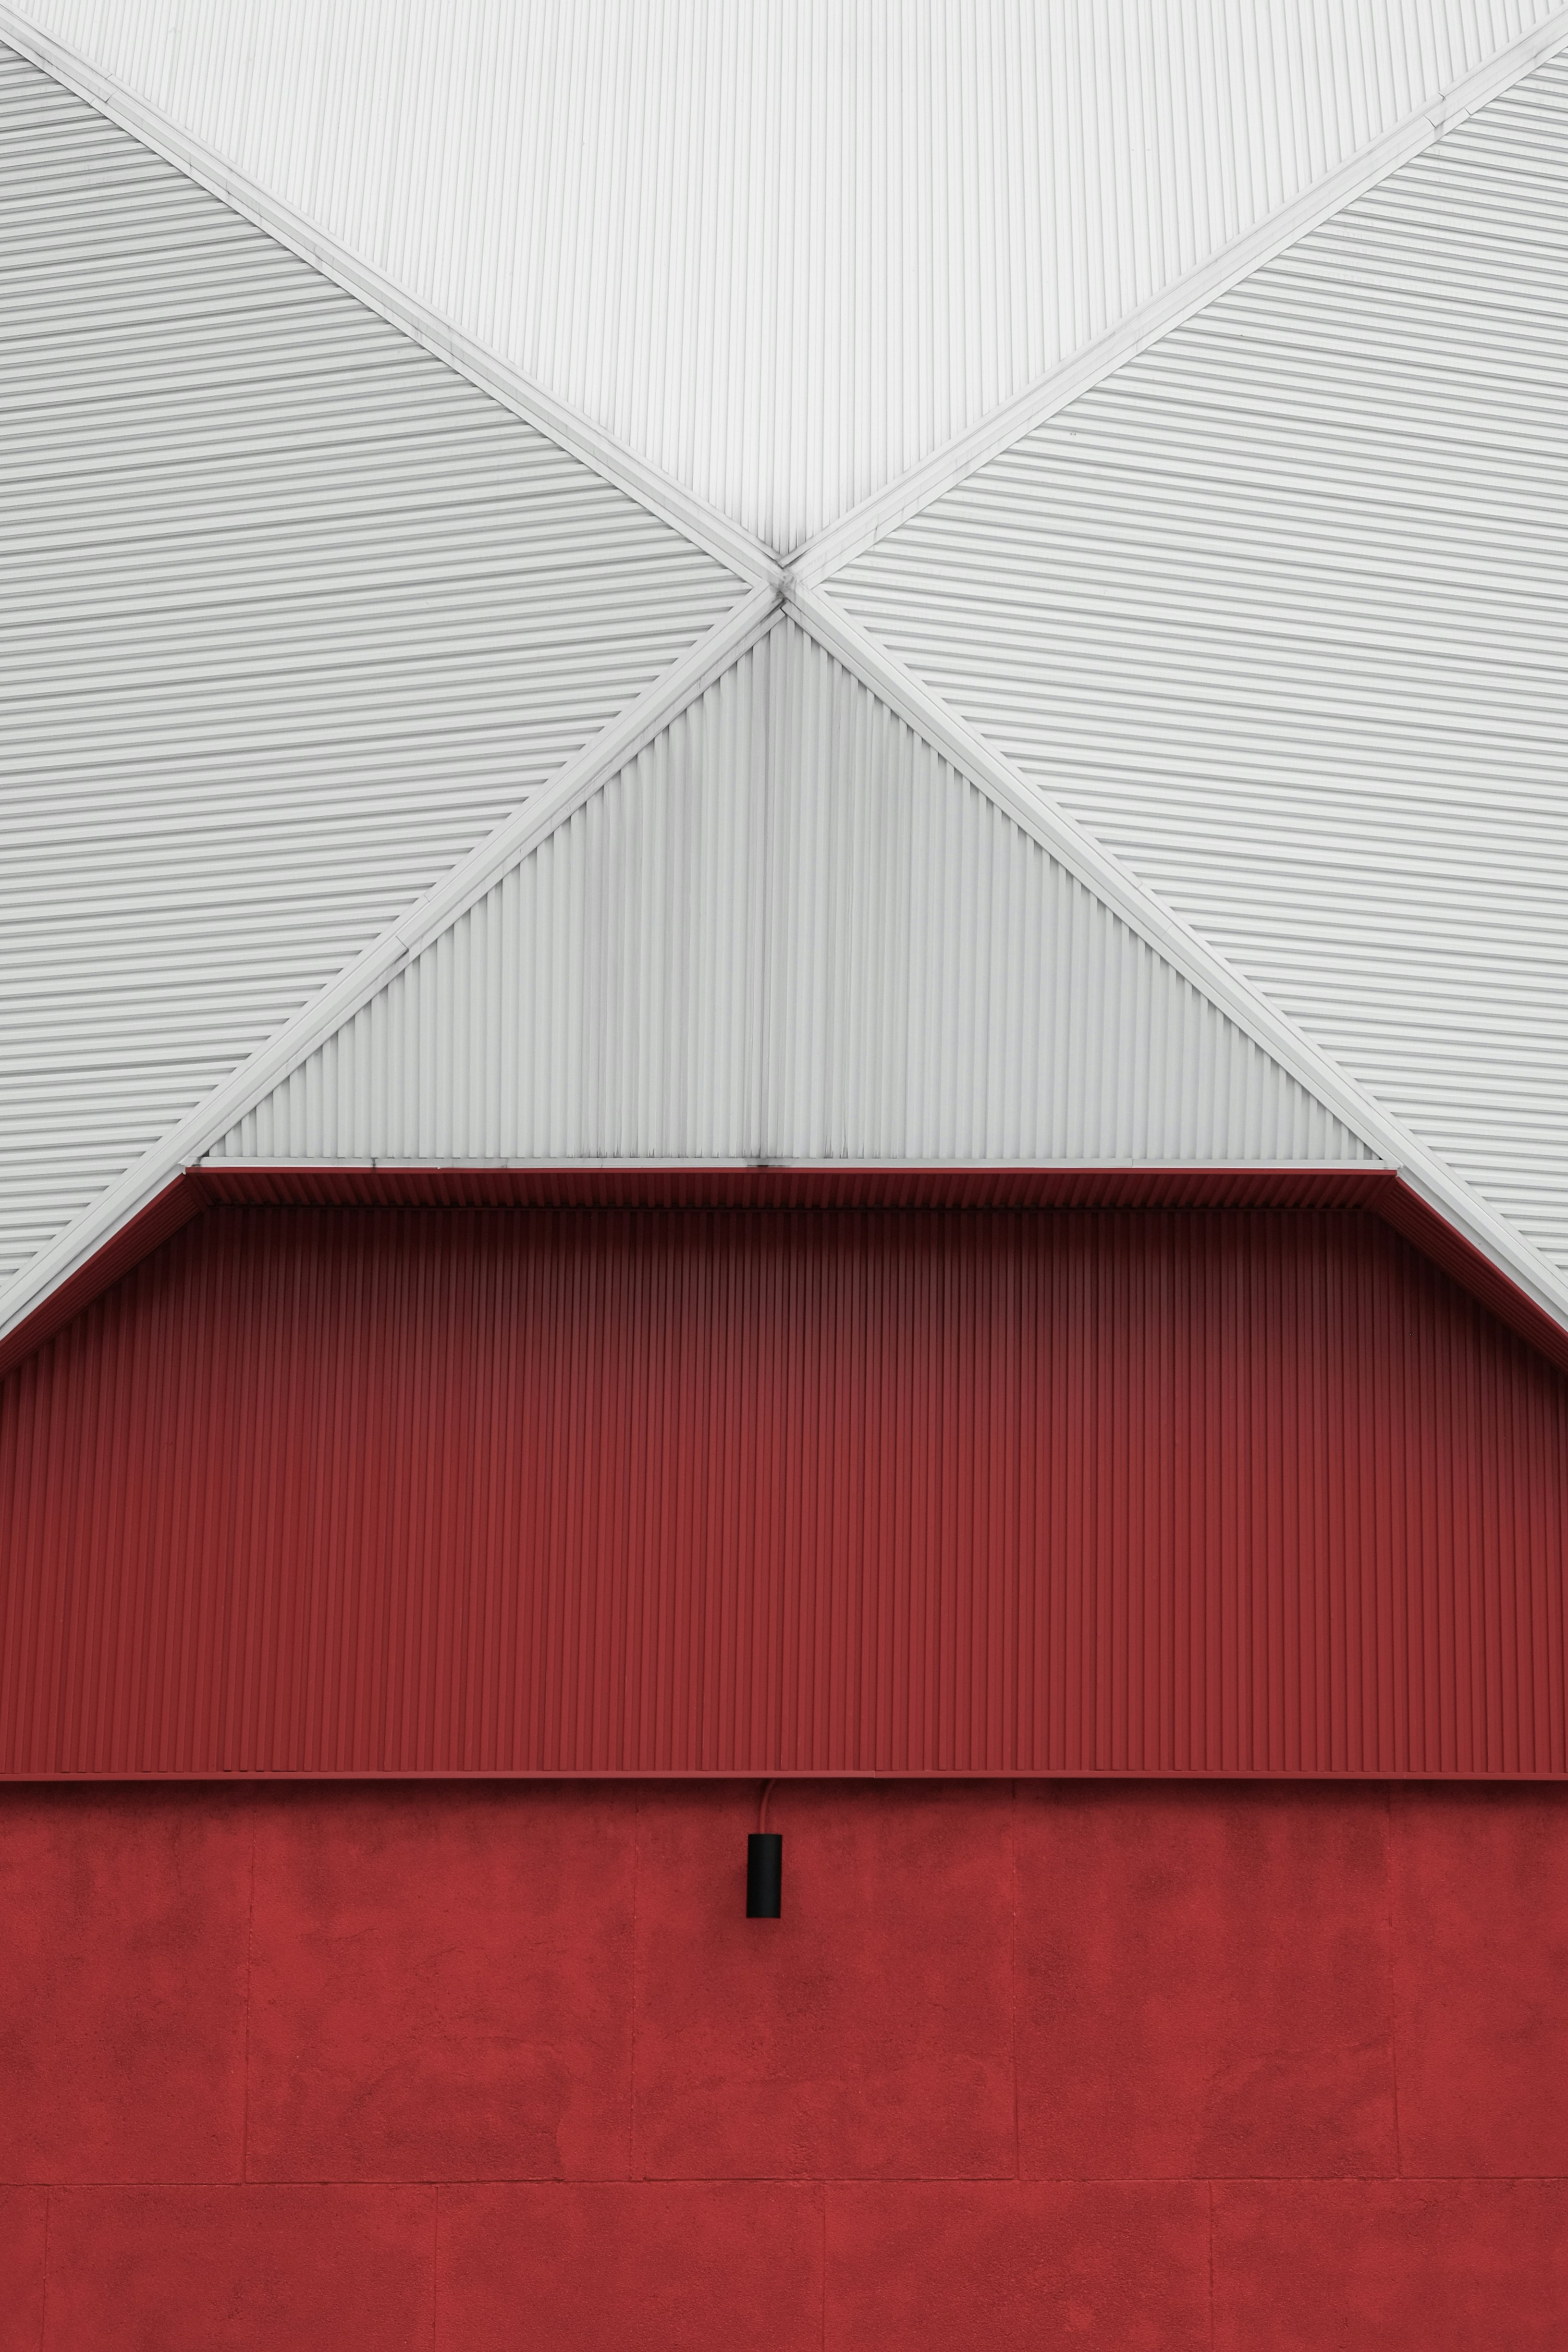 red and white wooden barn